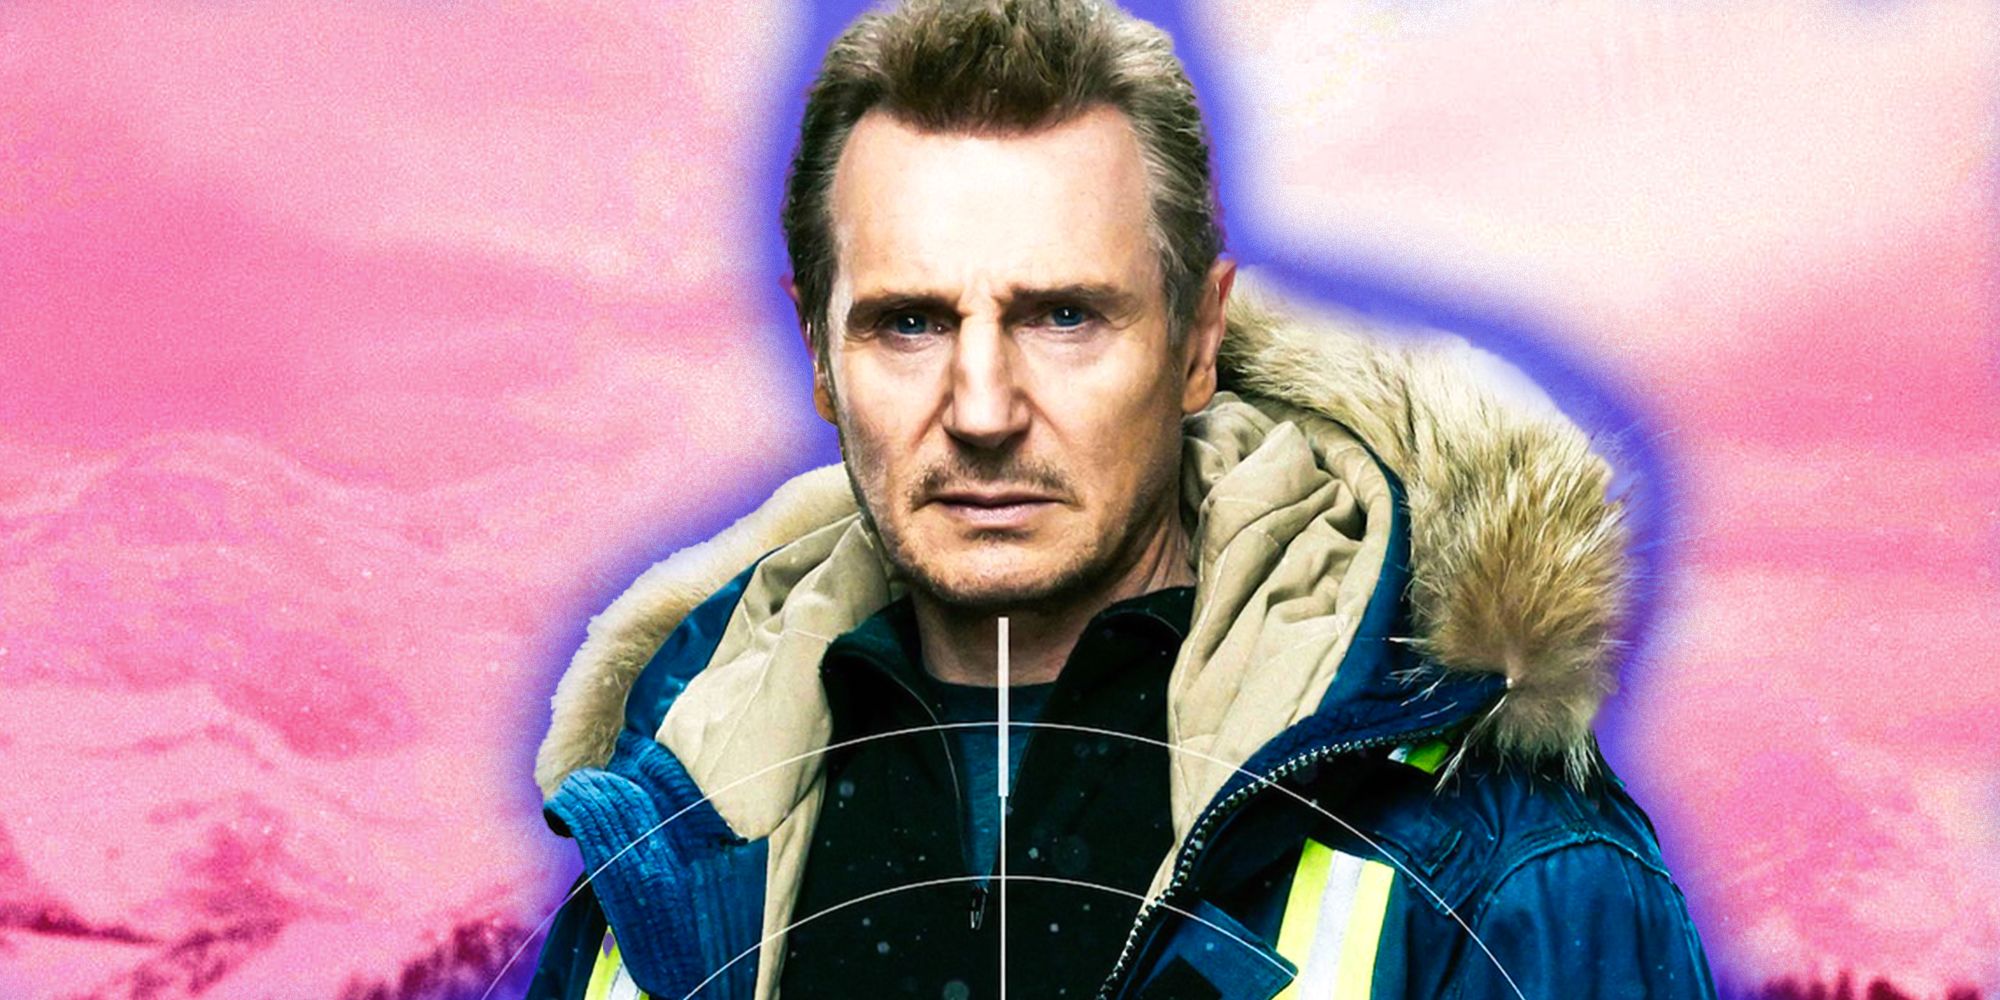 Liam Neeson in Cold Pursuit's poster